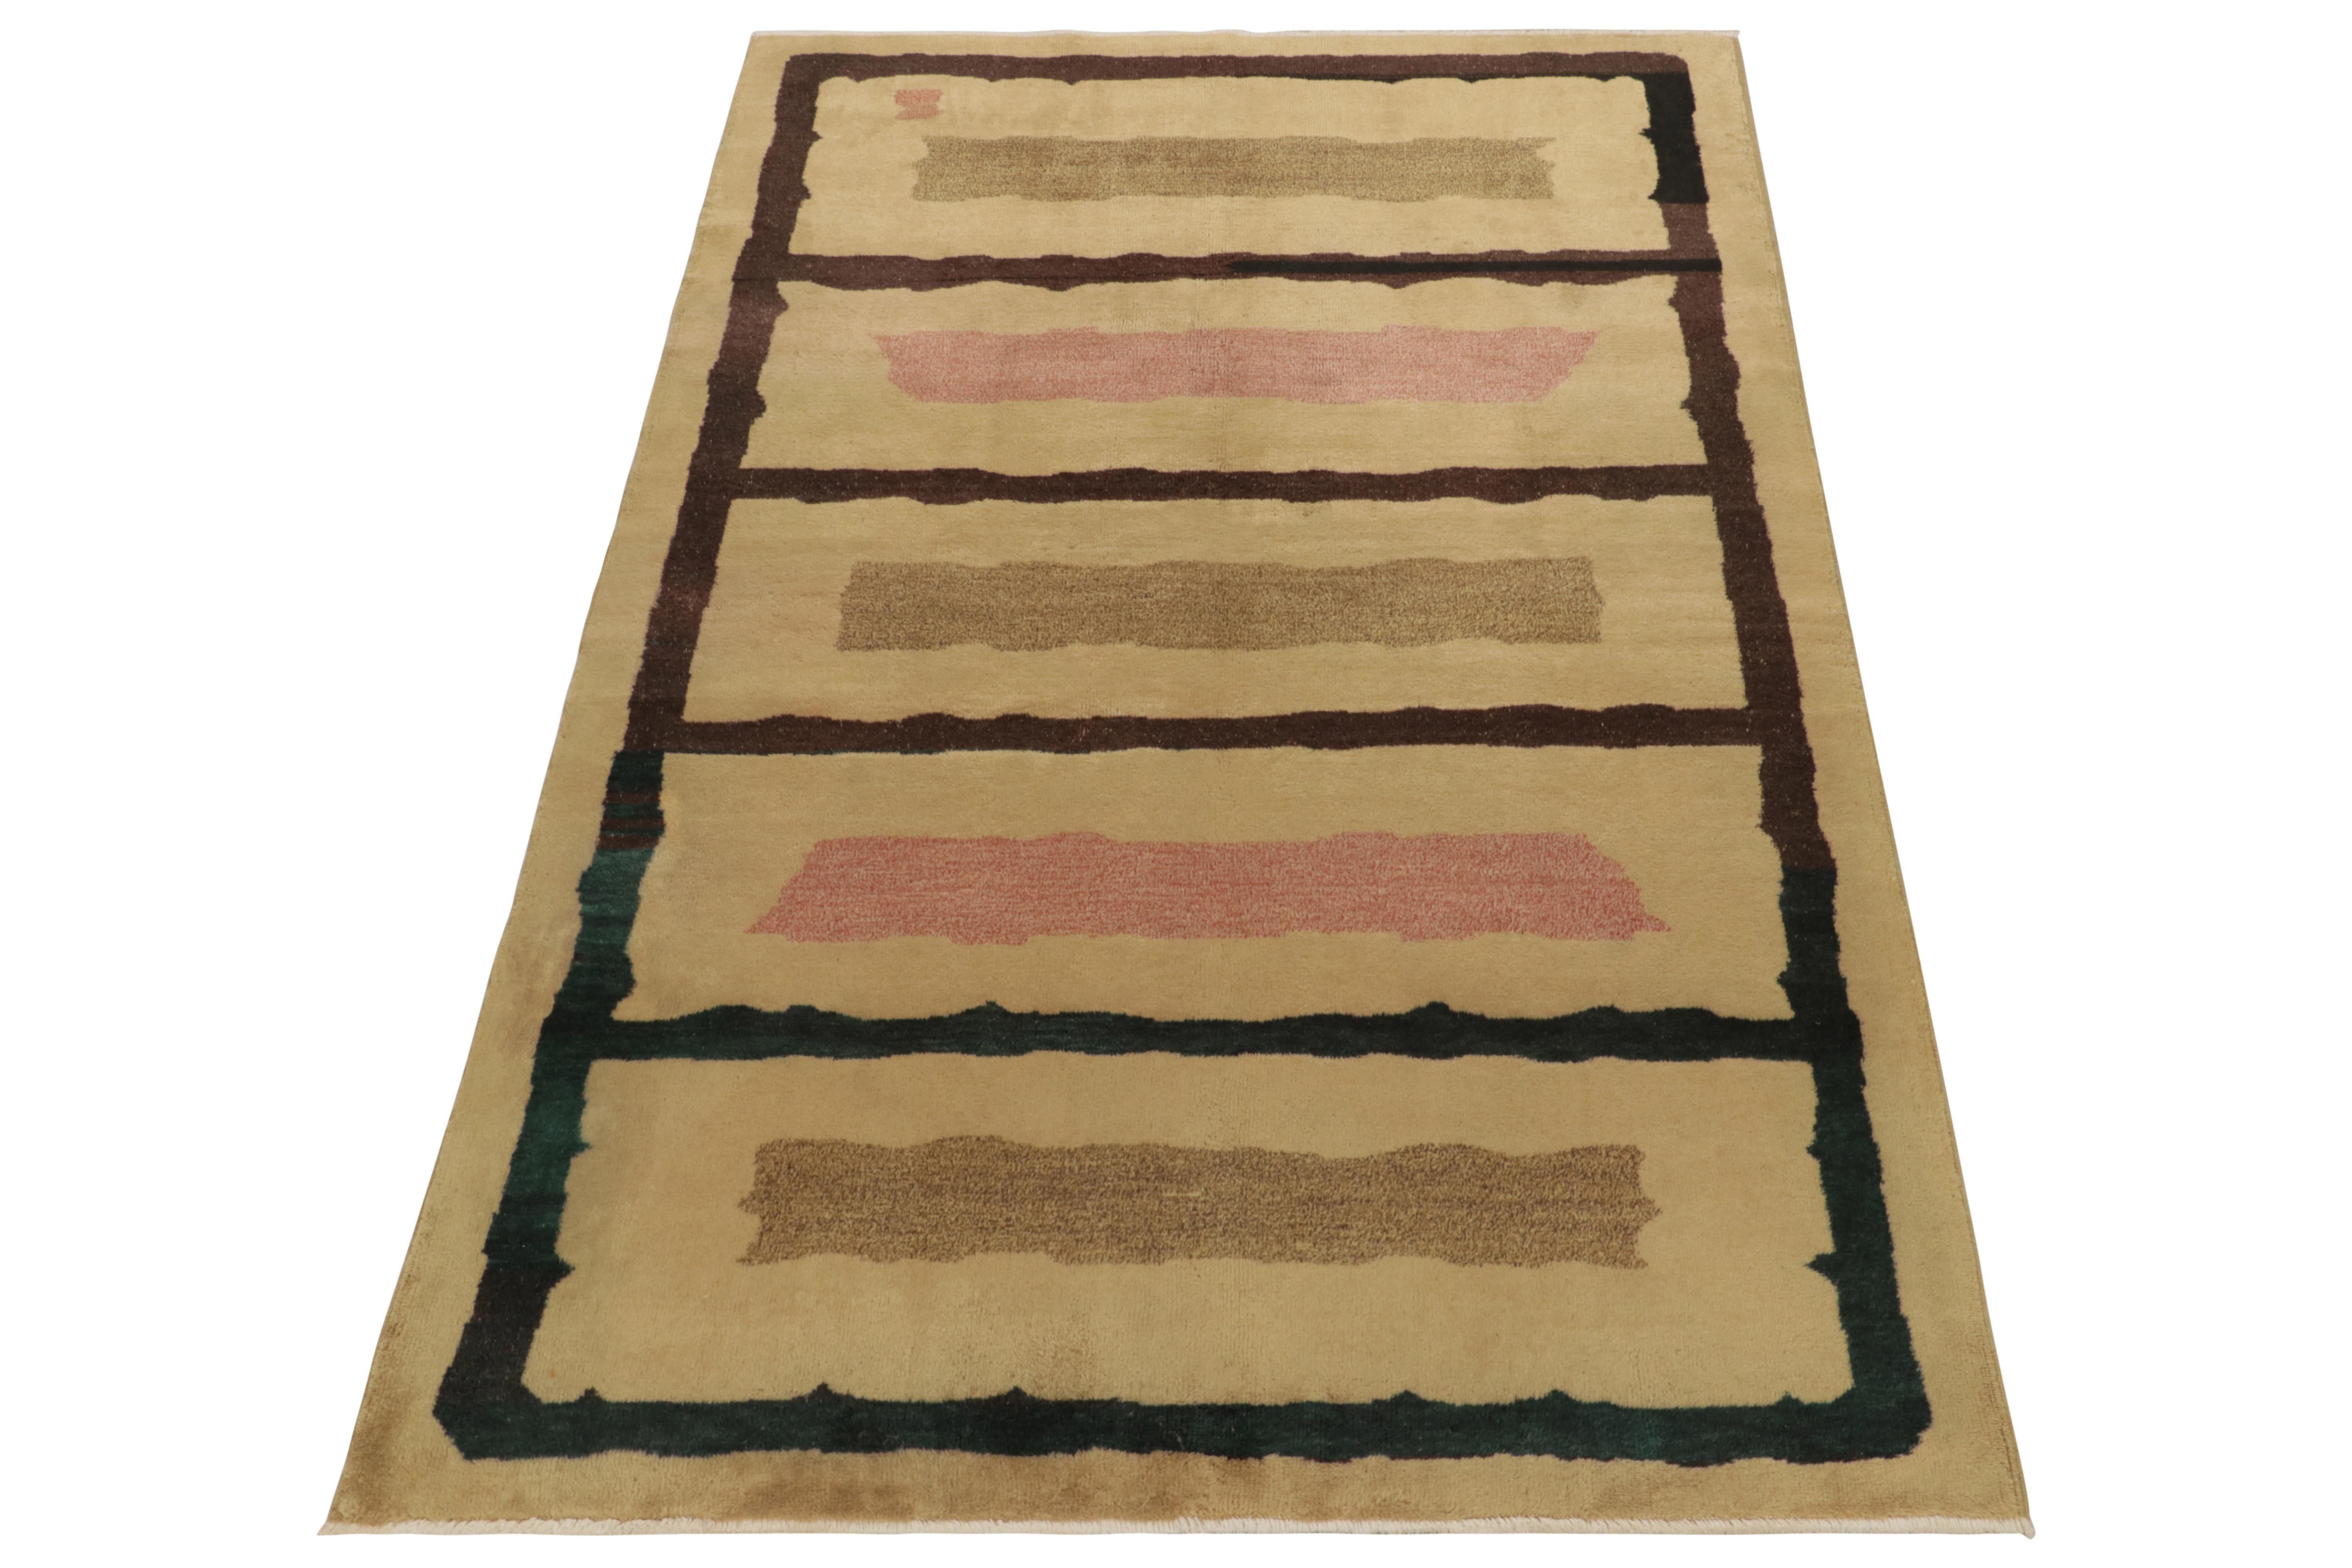 Originating from Turkey circa 1960-1970, a 5x9 vintage mid-century rug featuring a neat geometric pattern in variegated tones of pink and beige-brown. From Rug & Kilim’s Mid-Century Pasha Collection, commemorating the works of bold multidisciplinary